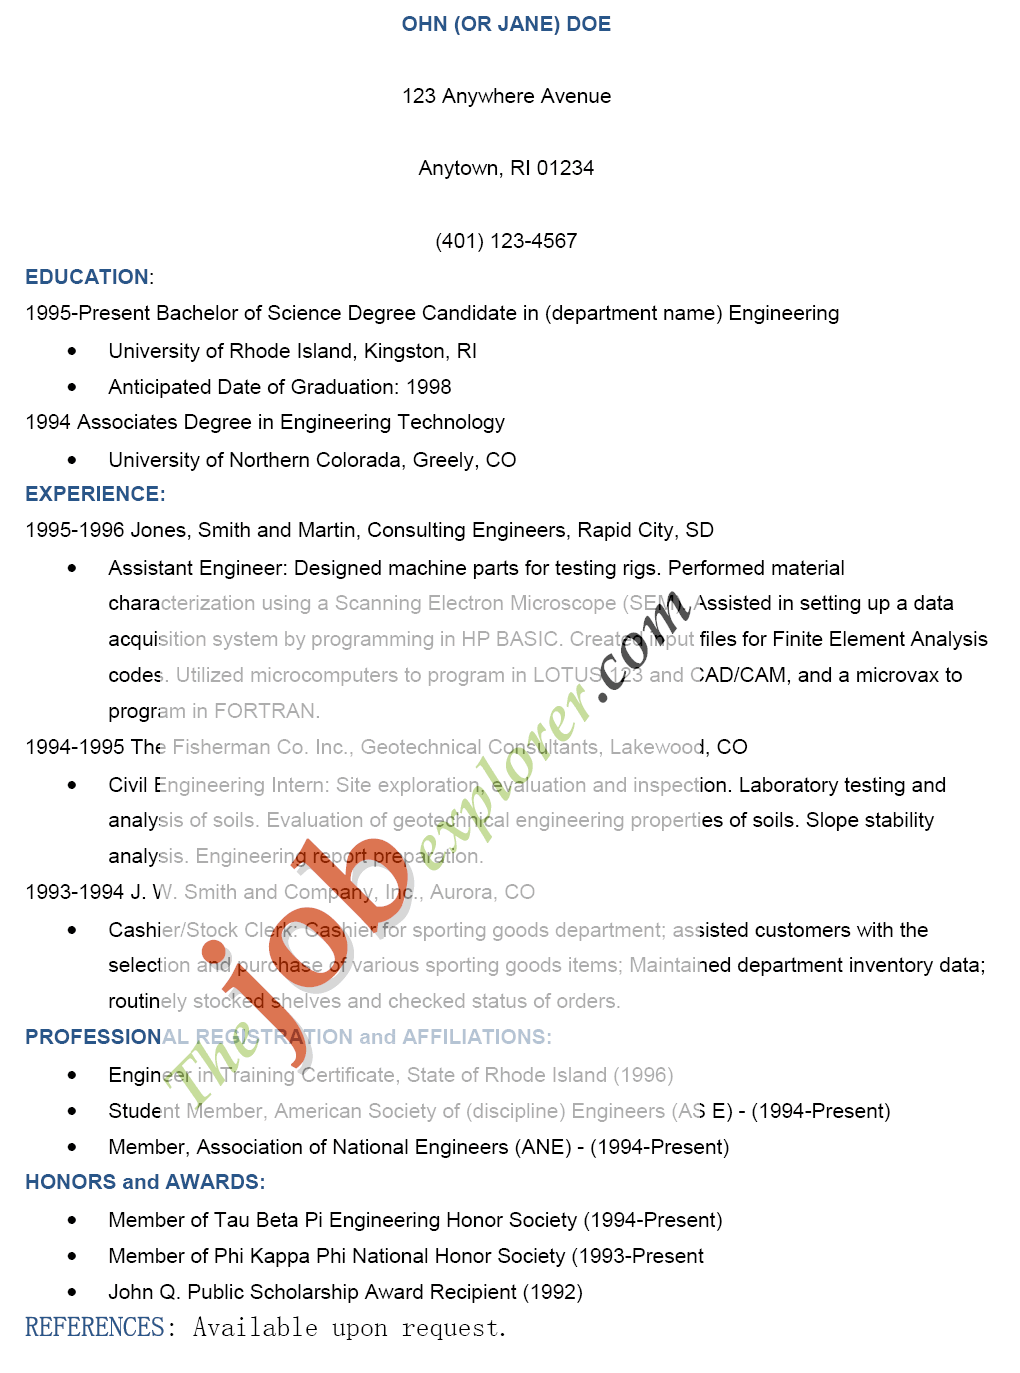 Example Job Cover Letter from www.thejobexplorer.com